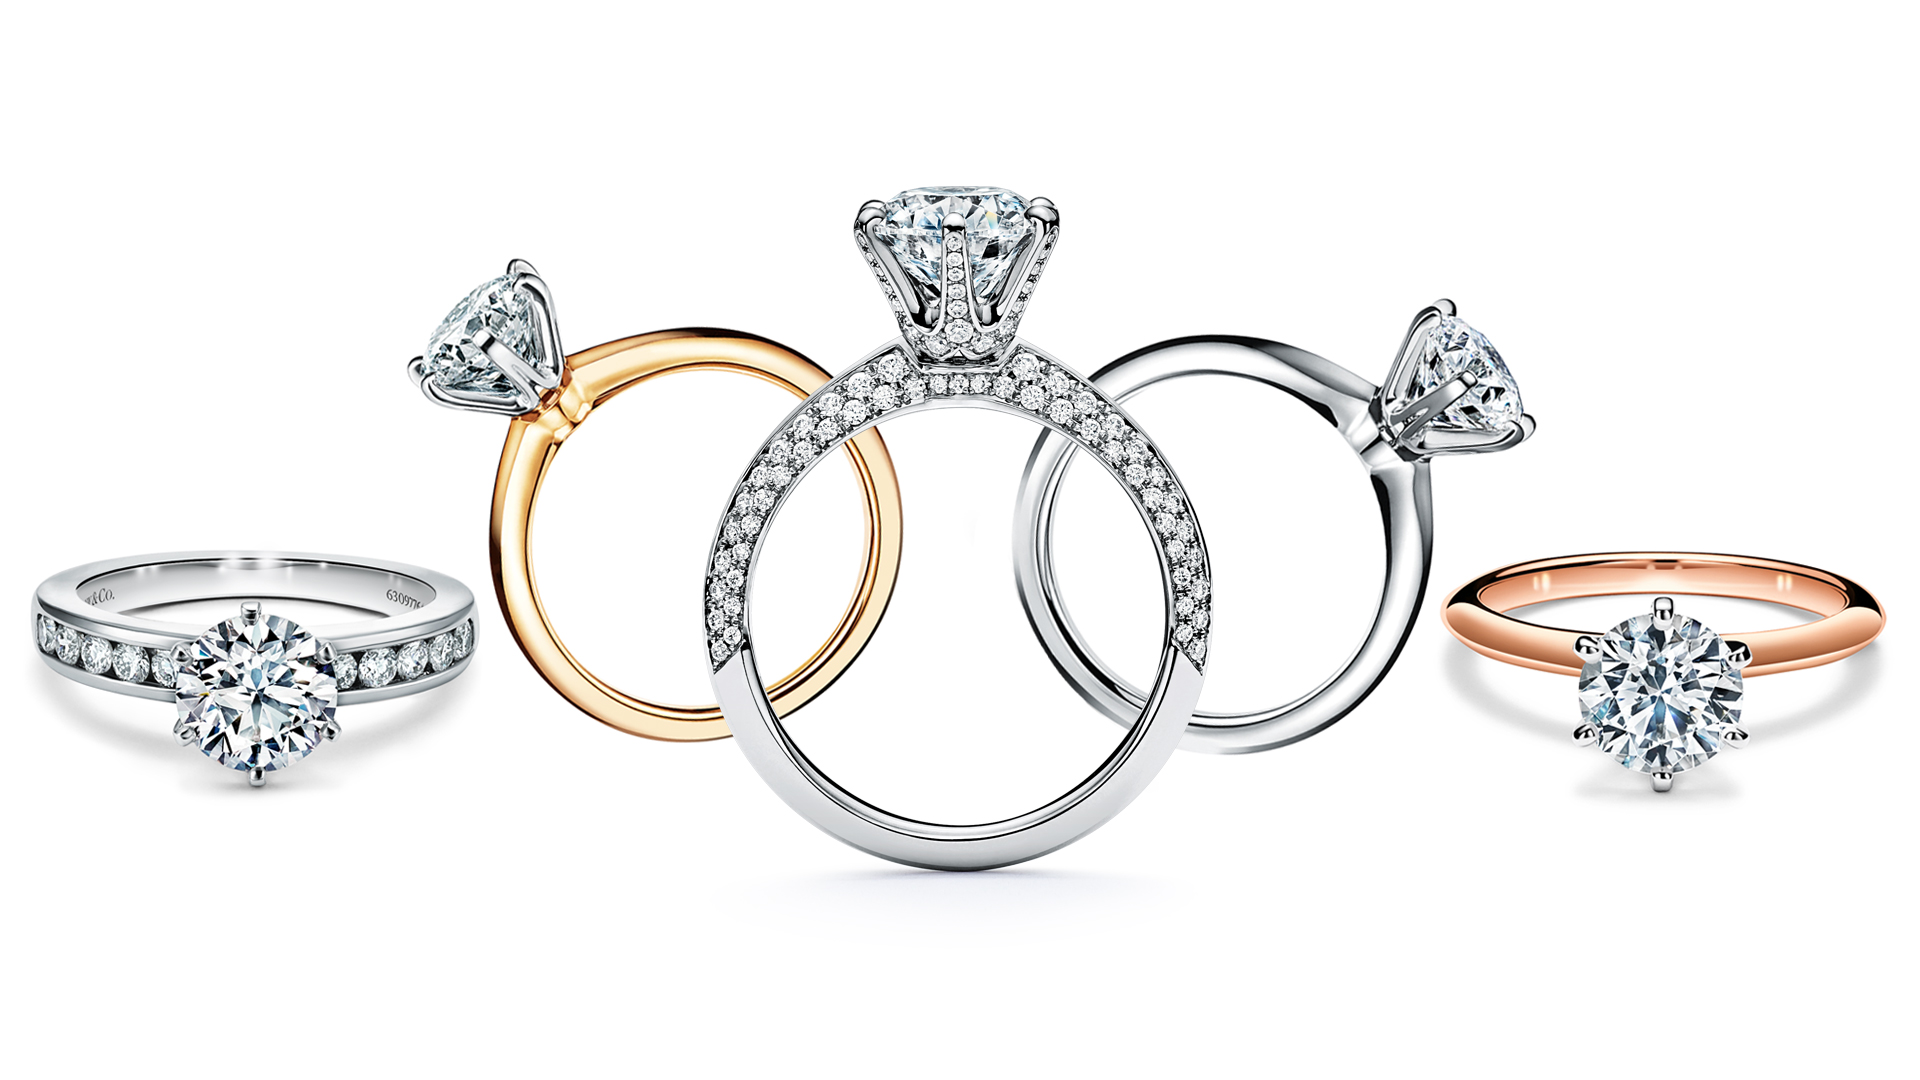 Designing Engagement and Wedding Rings